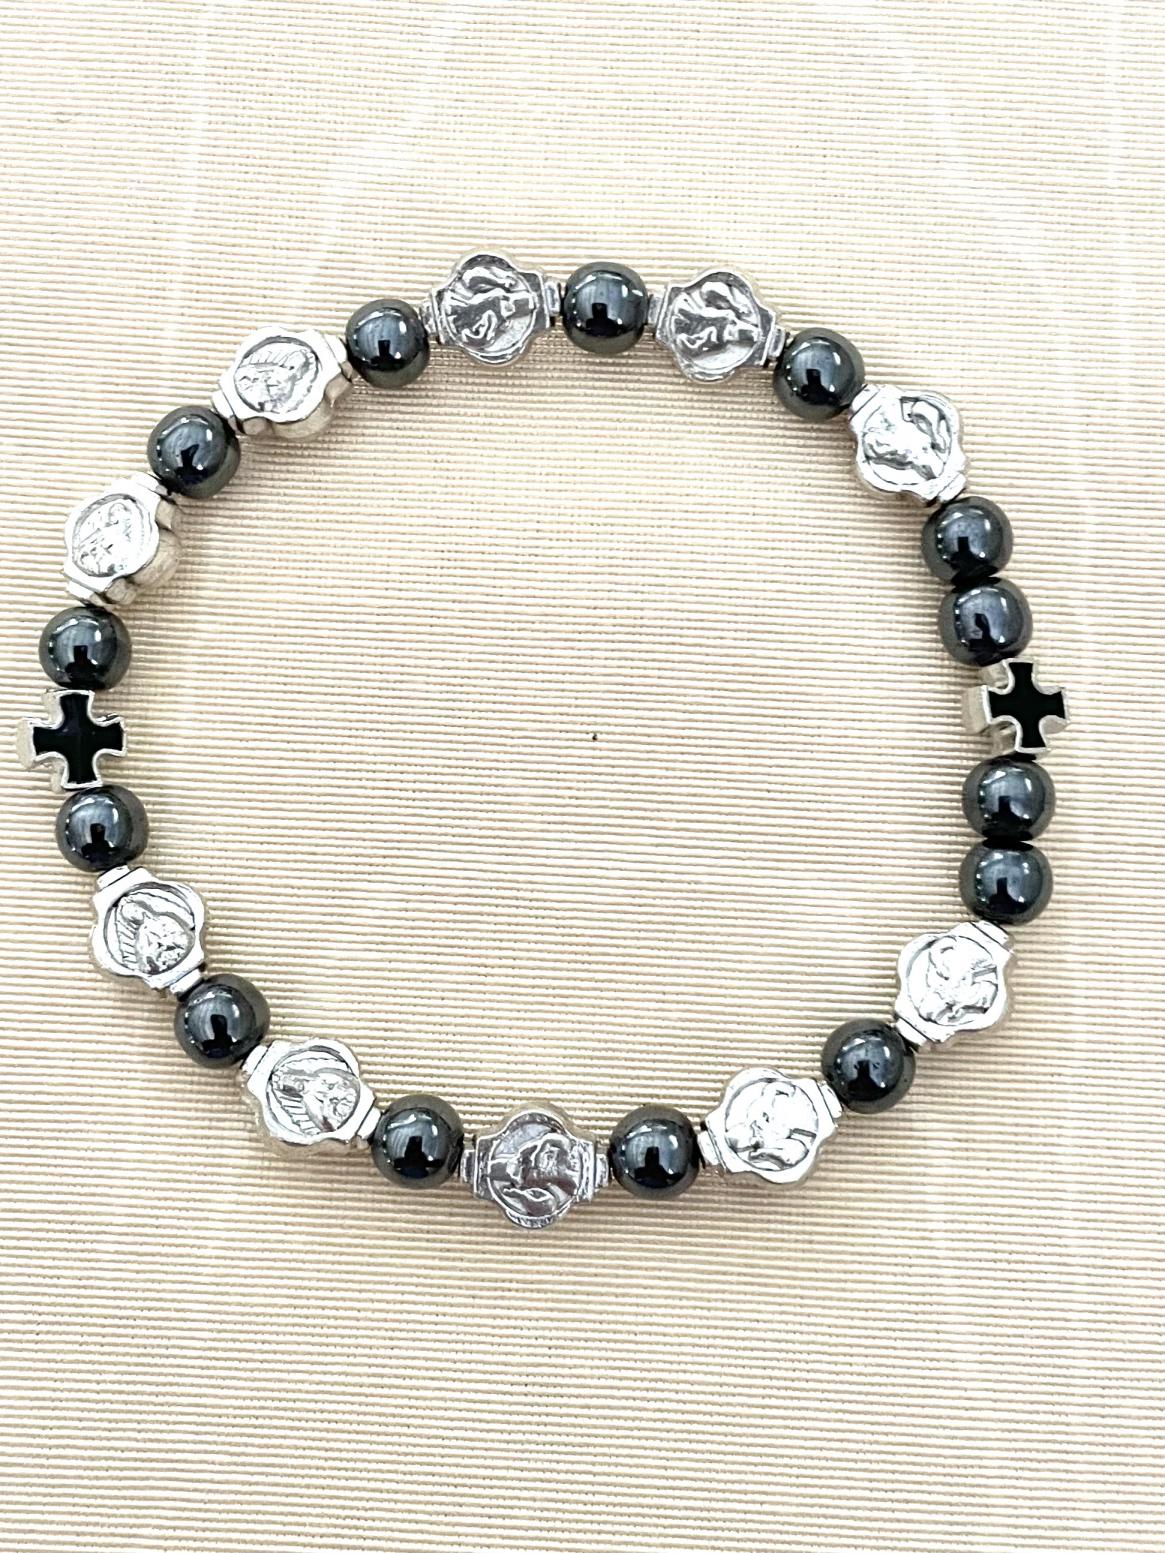 OUR LADY OF GUADALUPE MEDAL AND HEMATITE BEAD ROSARY BRACELET